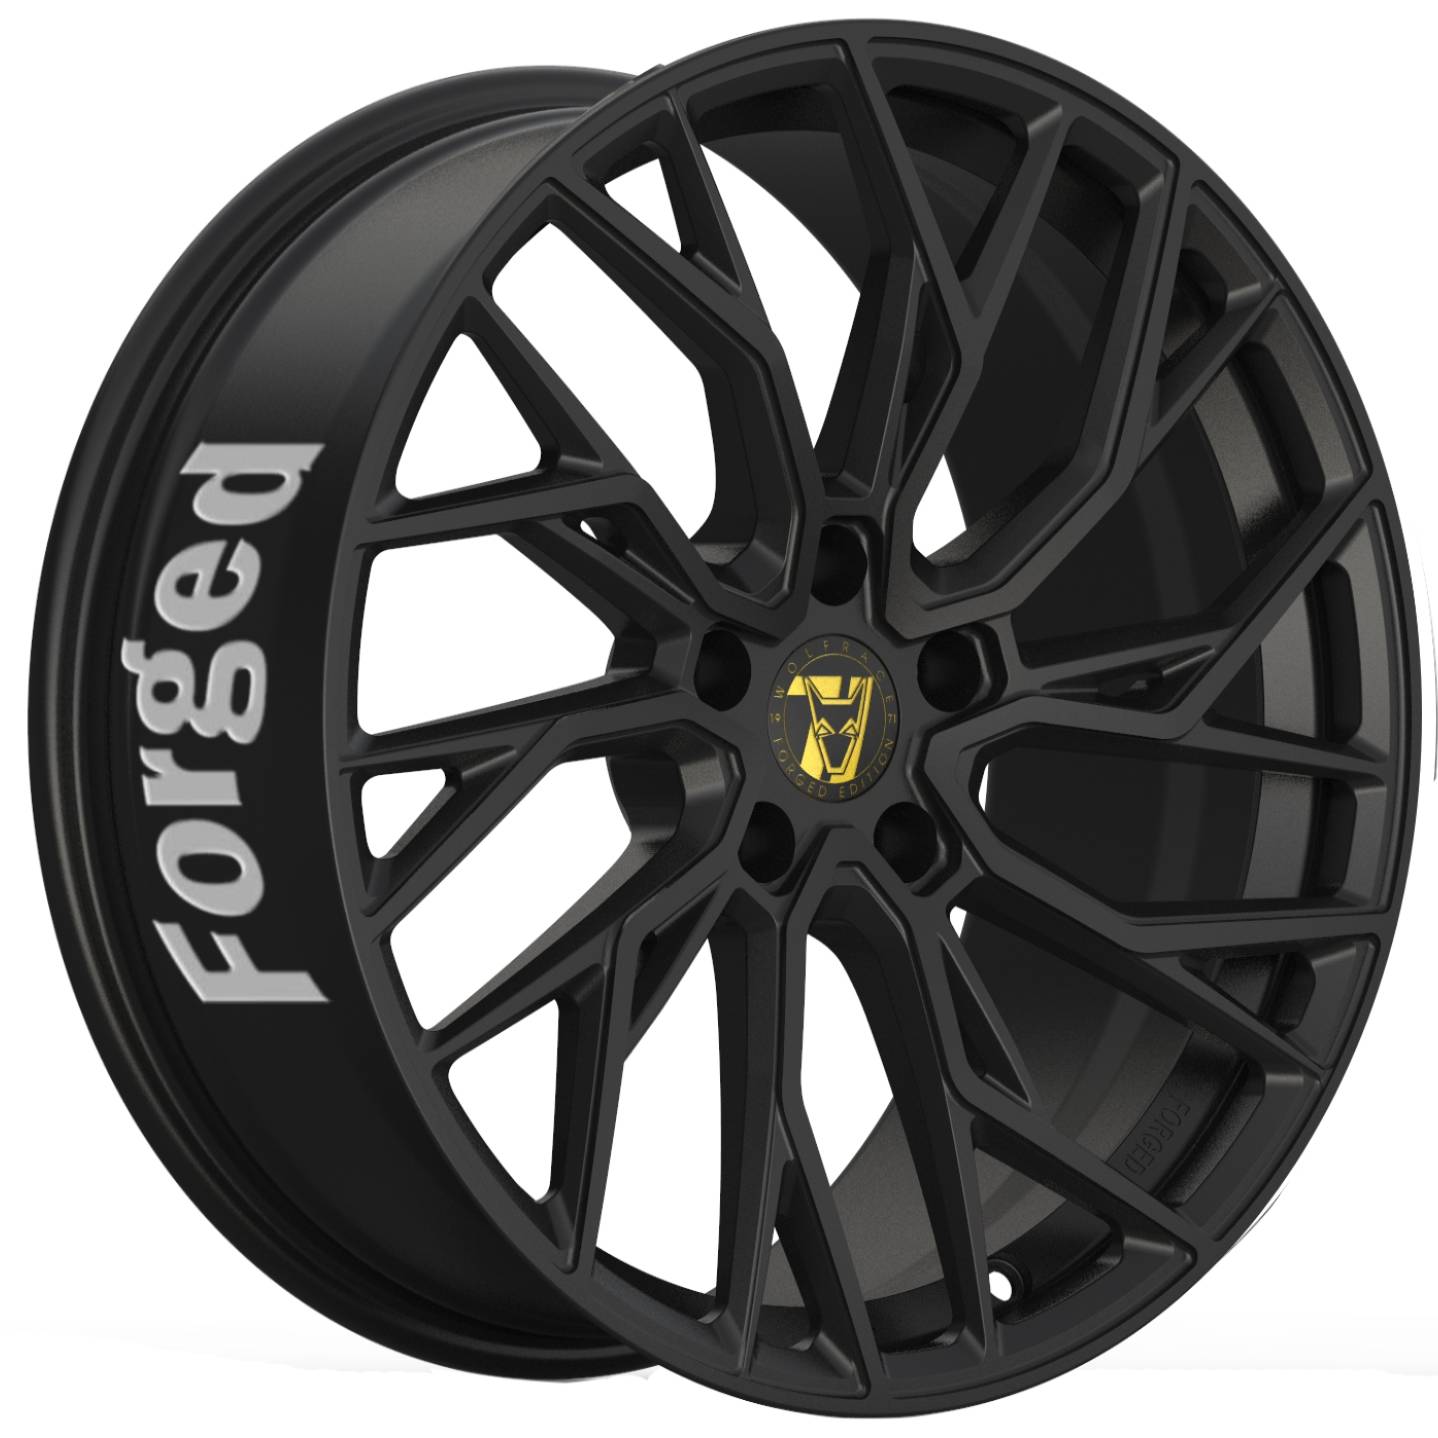 Demon Wheels 71 Forged Edition Voodoo Forged Satin Raven Black